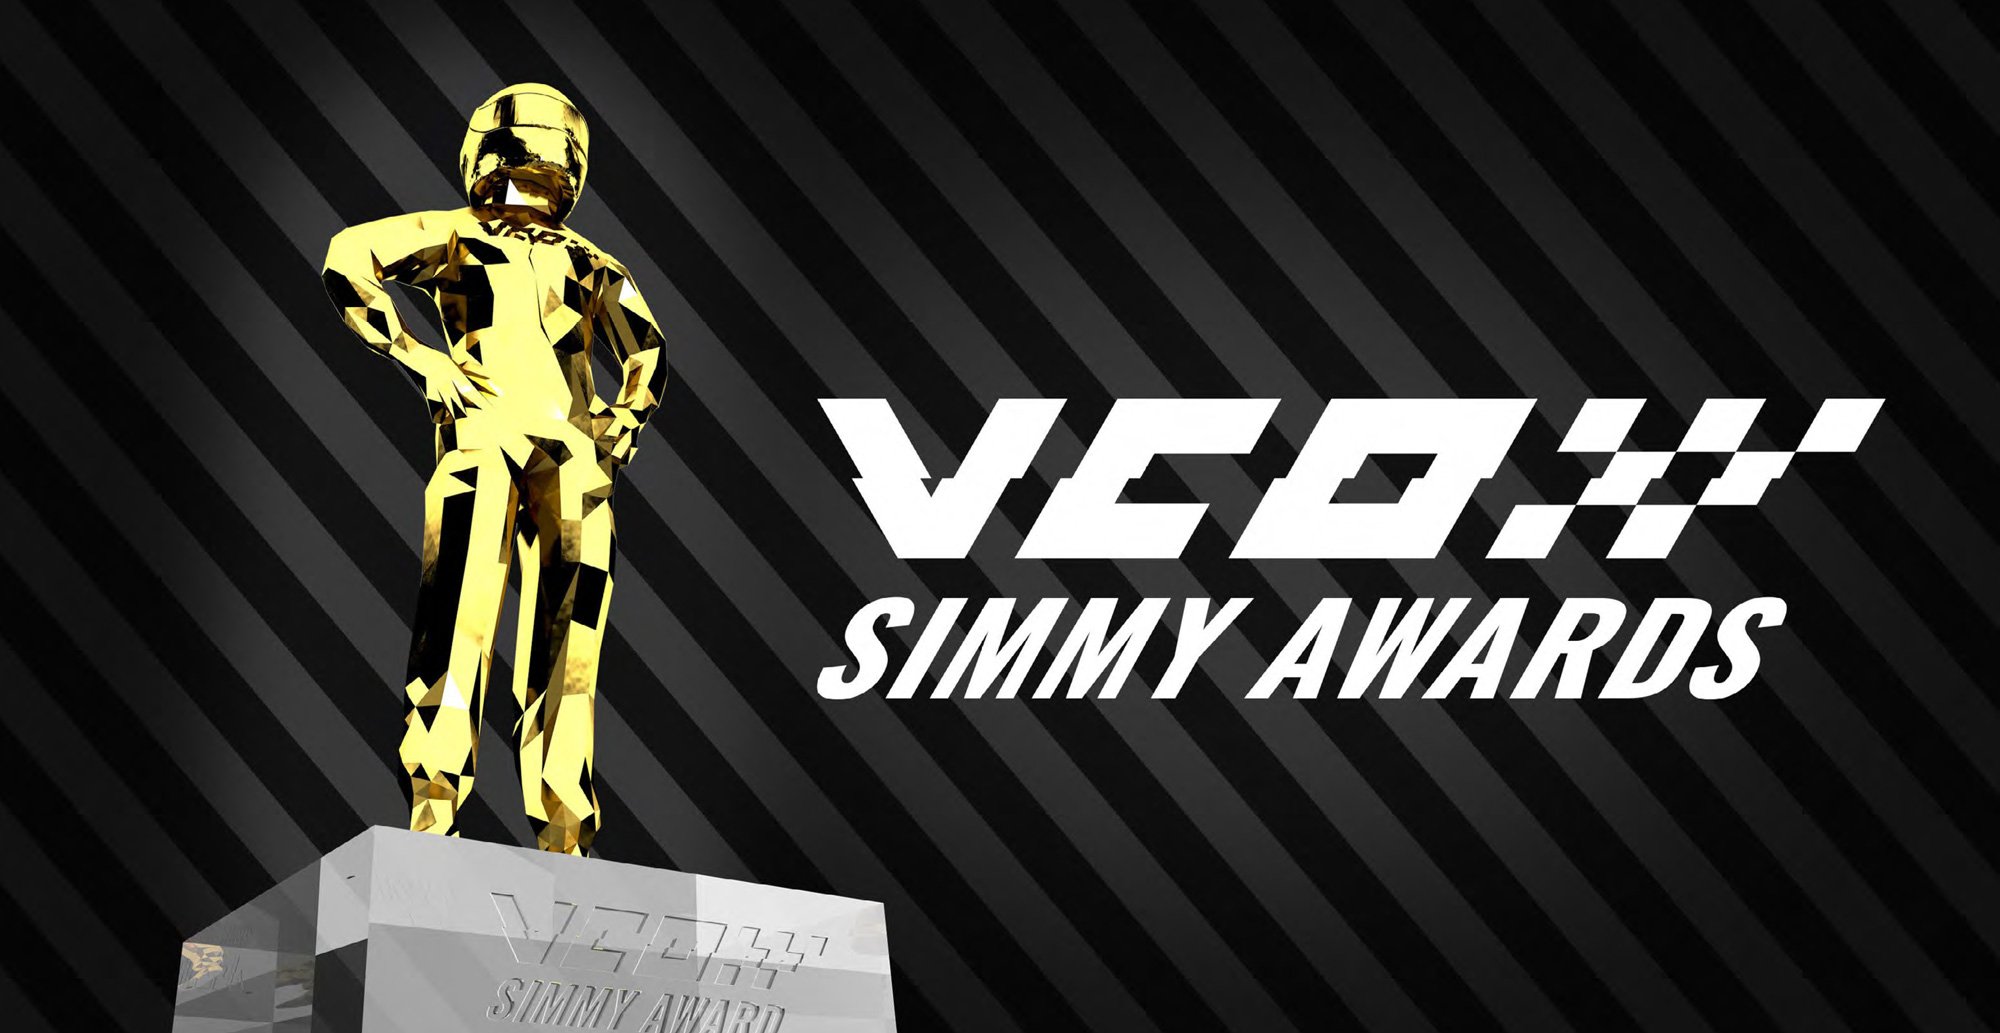 More information about "VCO SIMMY AWARDS 2021 [live 26 Dicembre ore 20]"